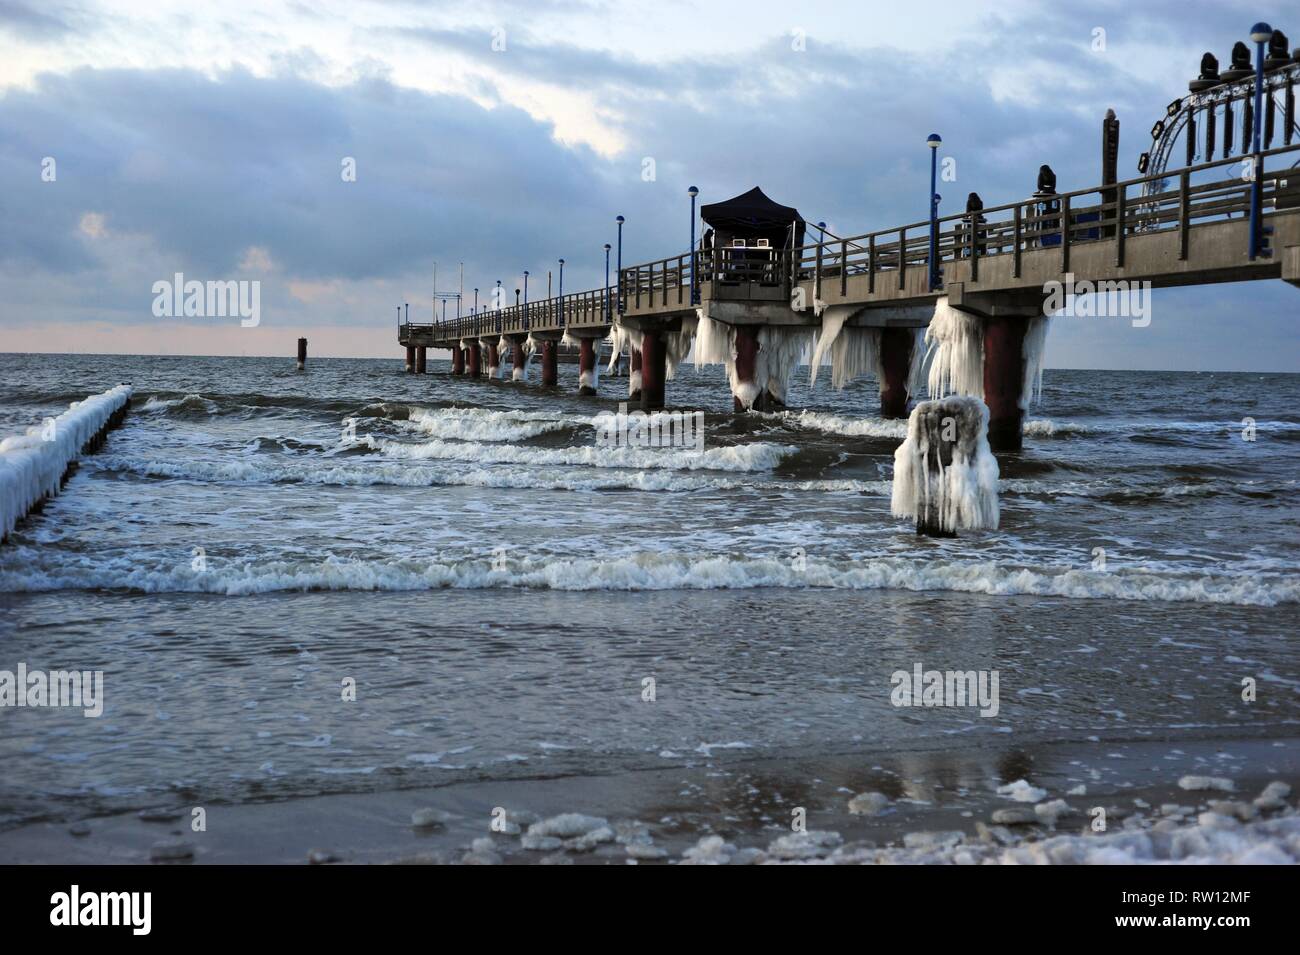 stock and Zingst seebrucke Alamy - images photography hi-res